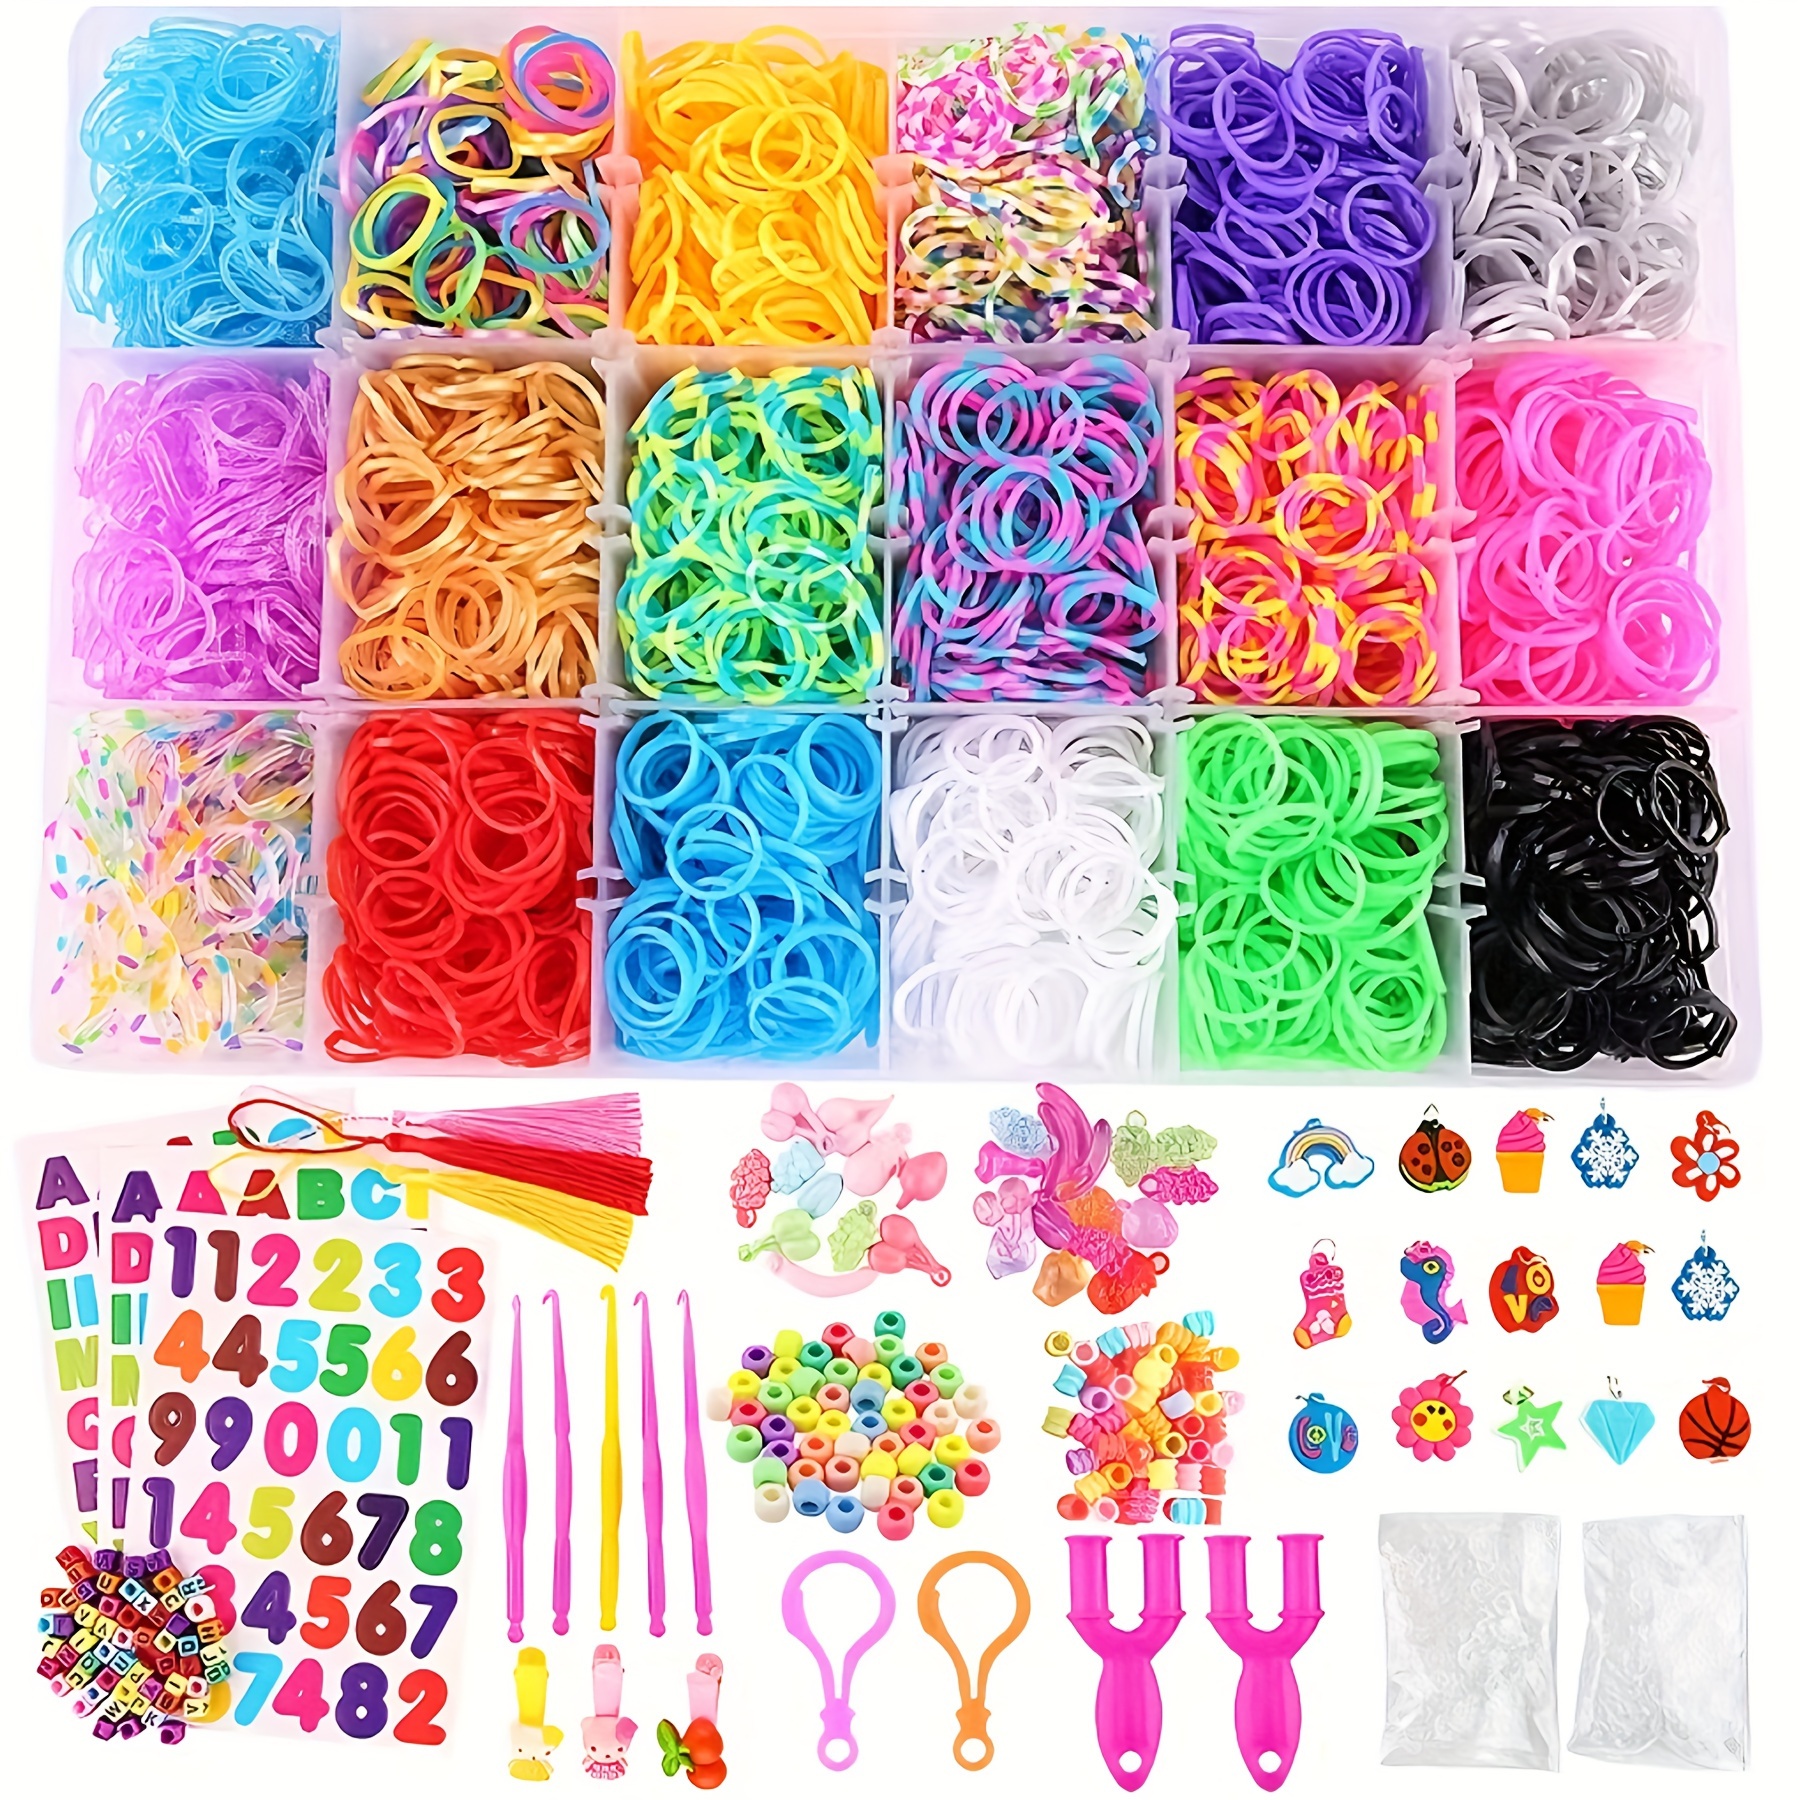 Loom Rubber Bands,Loom Bracelet Making Kit,Colored Rubber Bands Kit, Loom  Set for DIY Toys,Looming Bands Kits with a Gift Case,23 Colors Birthday  Gift for Girl Craft Kits, Kids Gift Kits